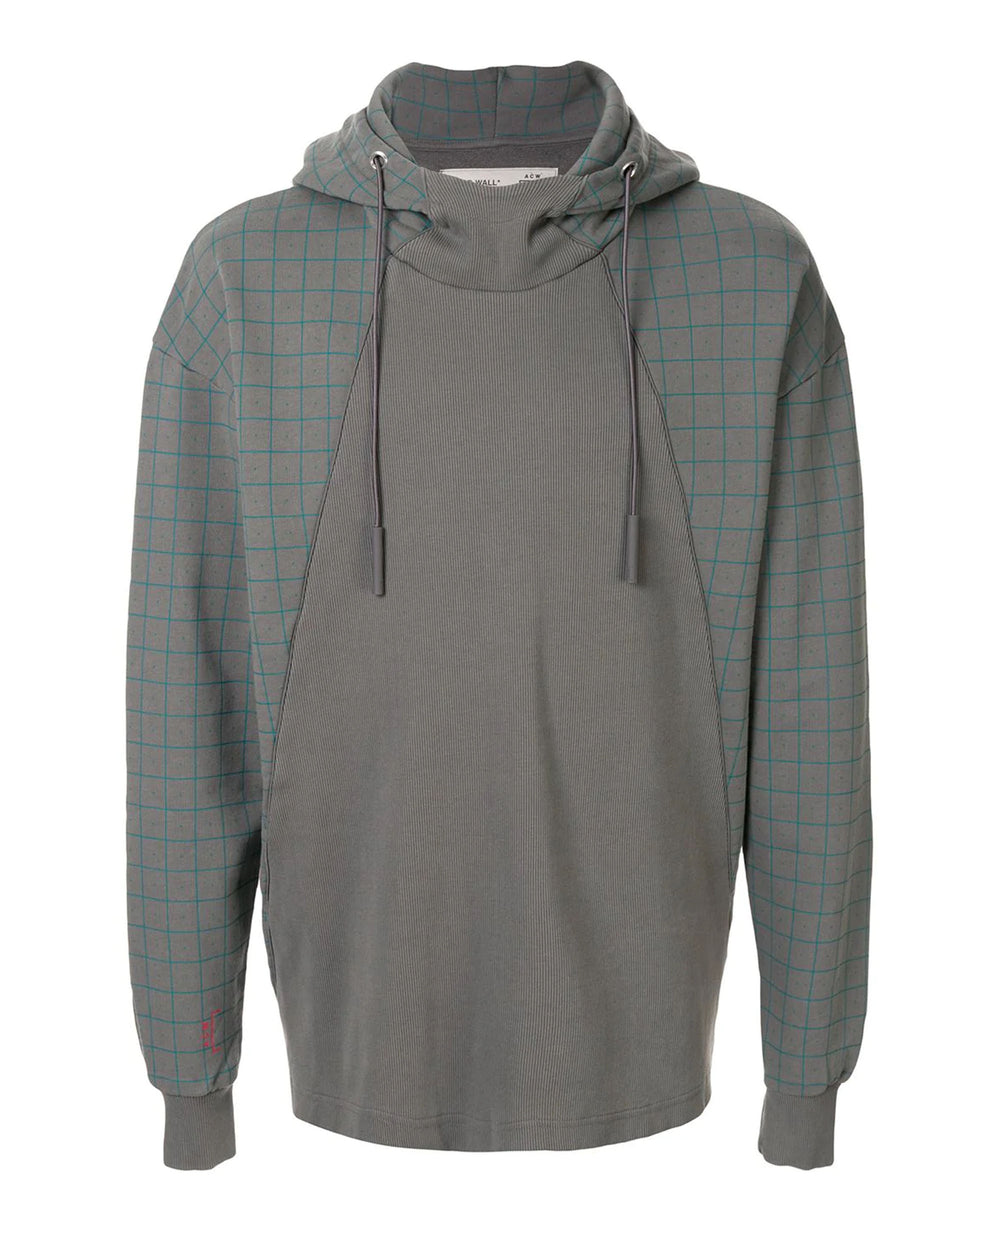 A-Cold-Wall Print Grey – STASHED